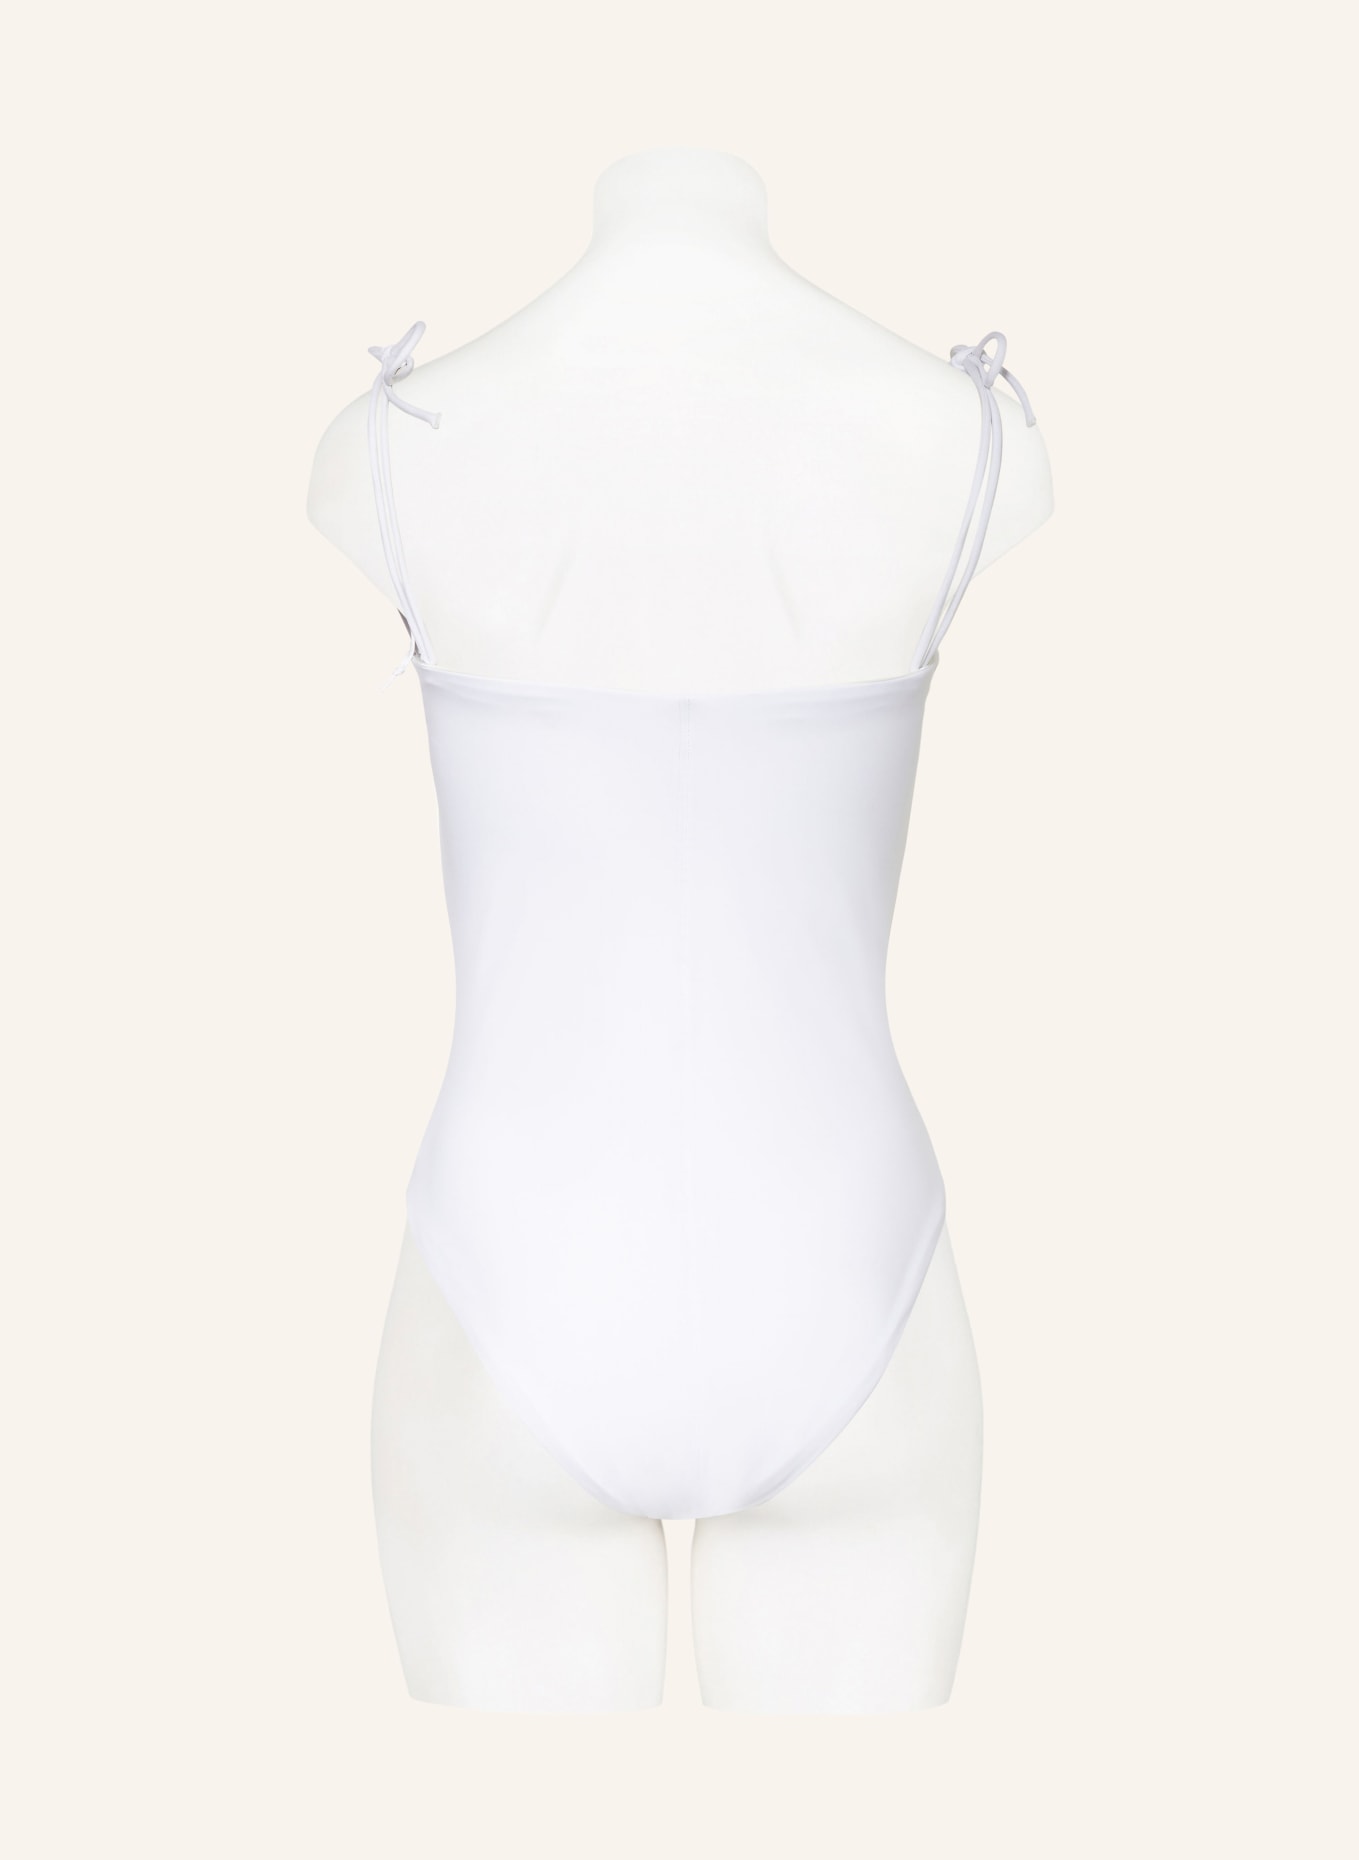 VIKTORIA LOUISE Swimsuit THE HOURGLASS, Color: WHITE (Image 3)